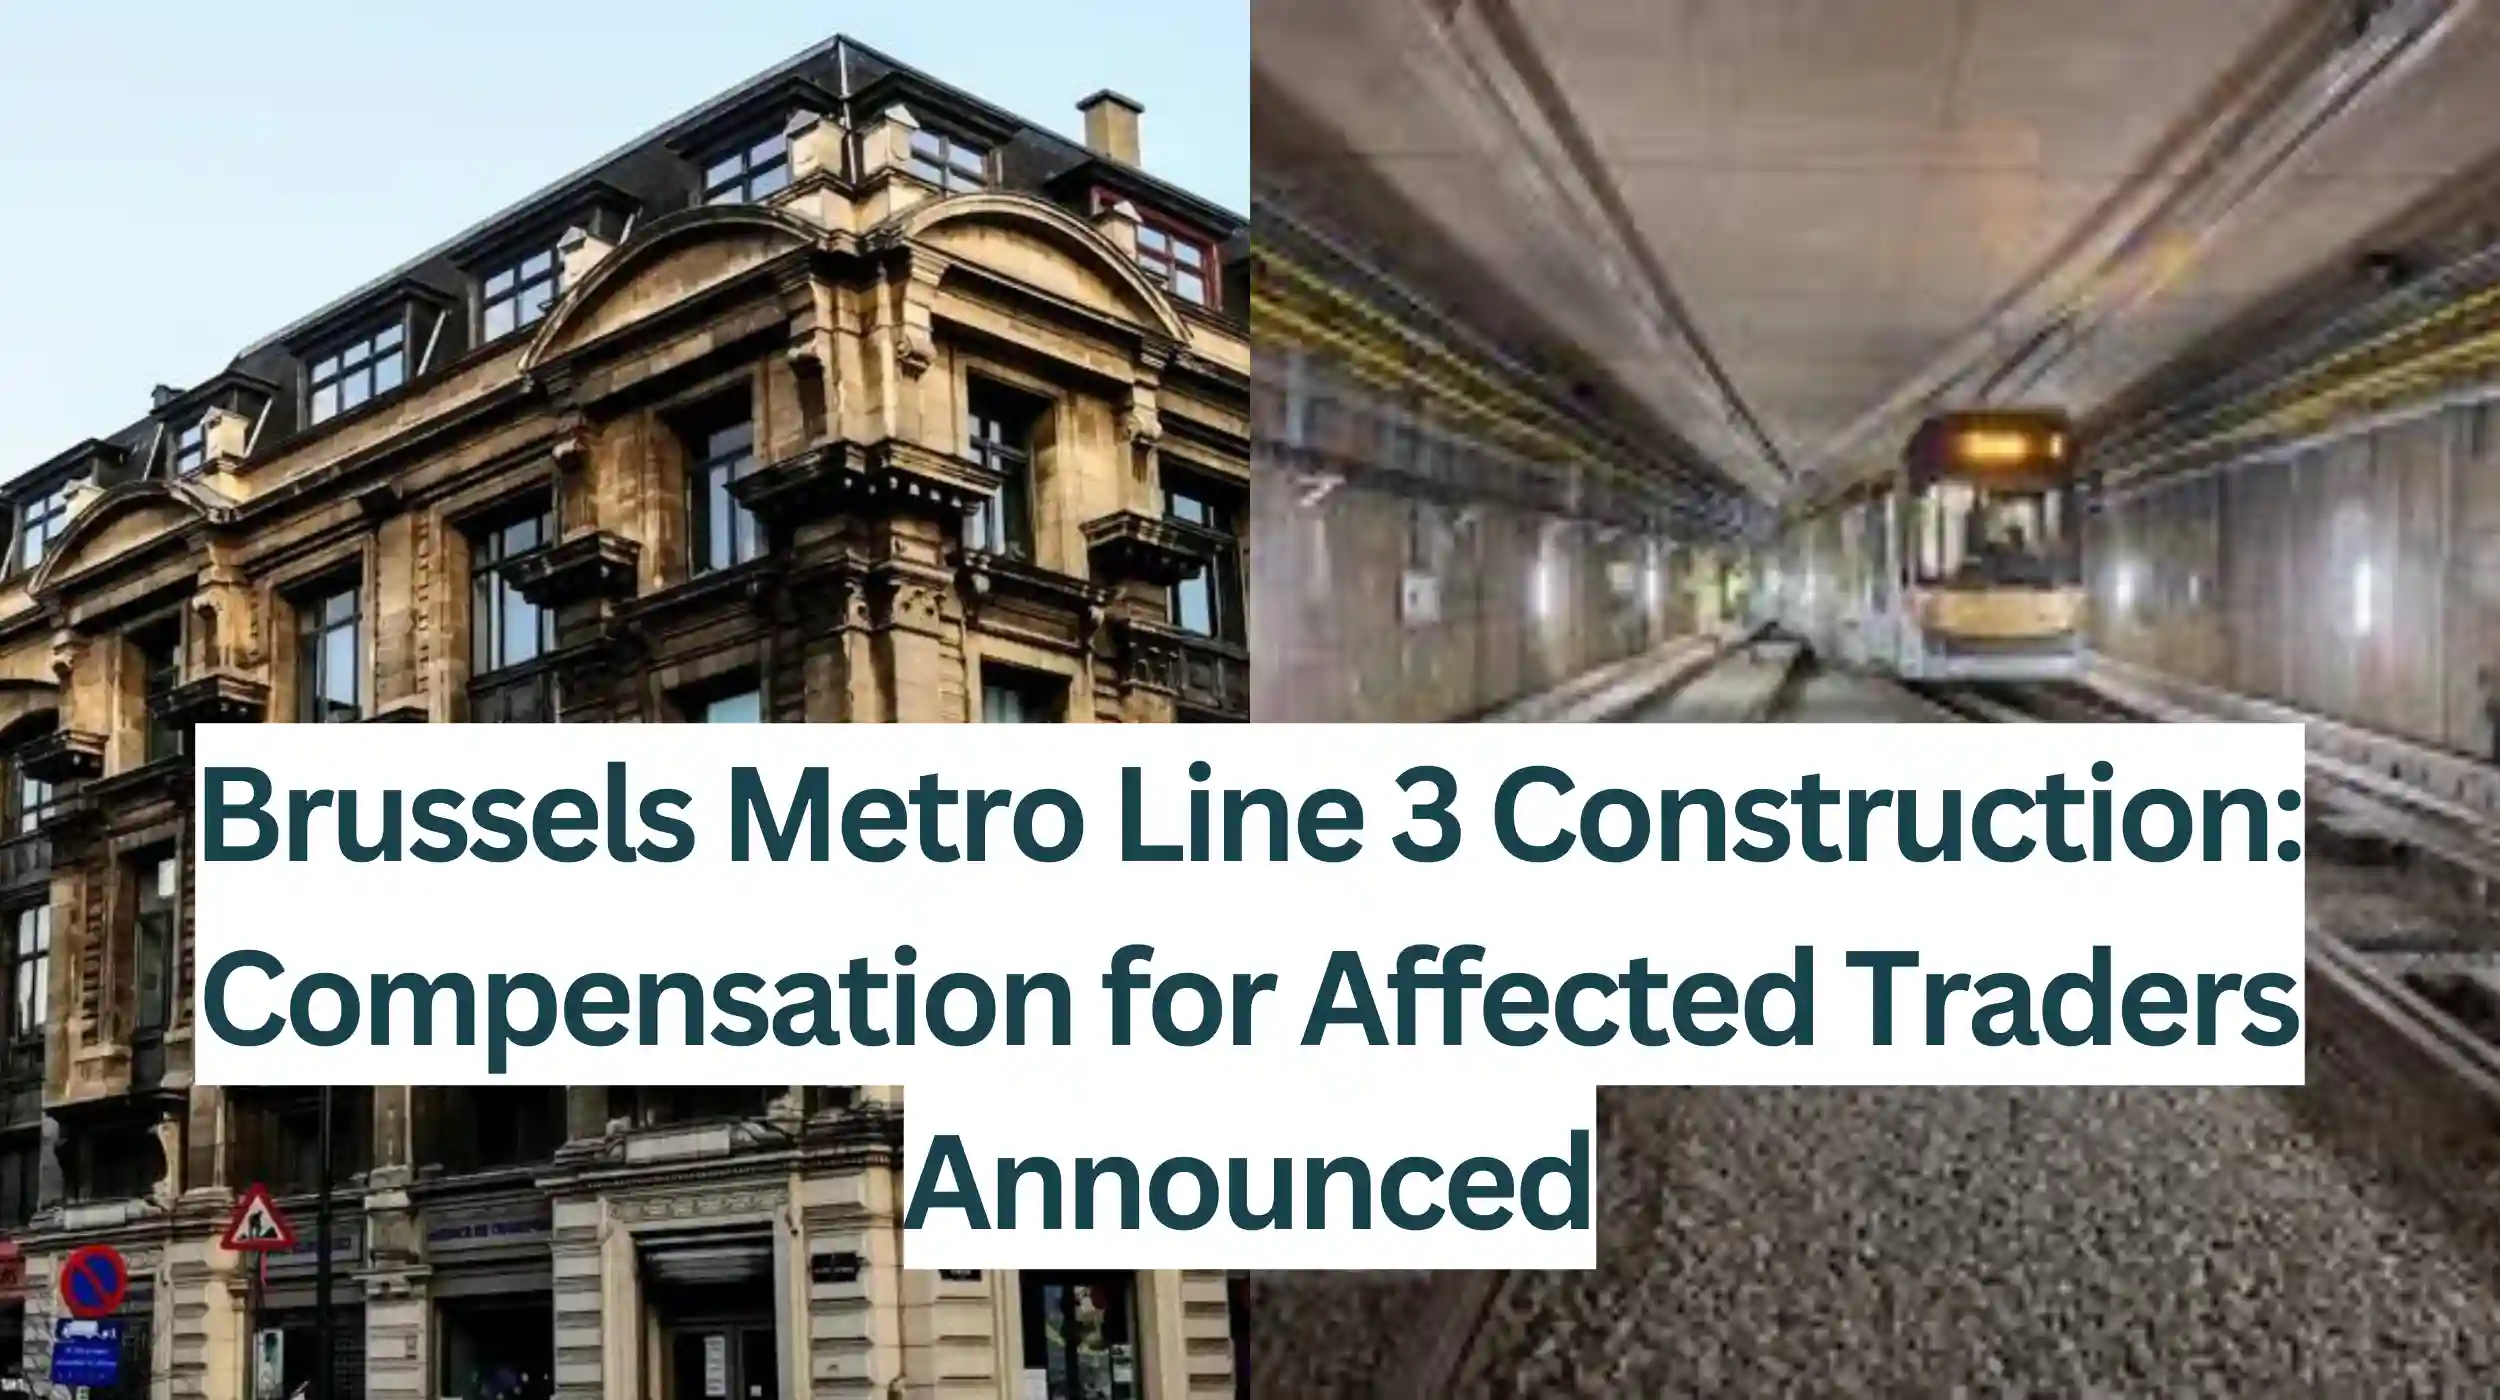 Compensation-for-Affected-Traders-Announced-for-Brussels-Metro-Line-3